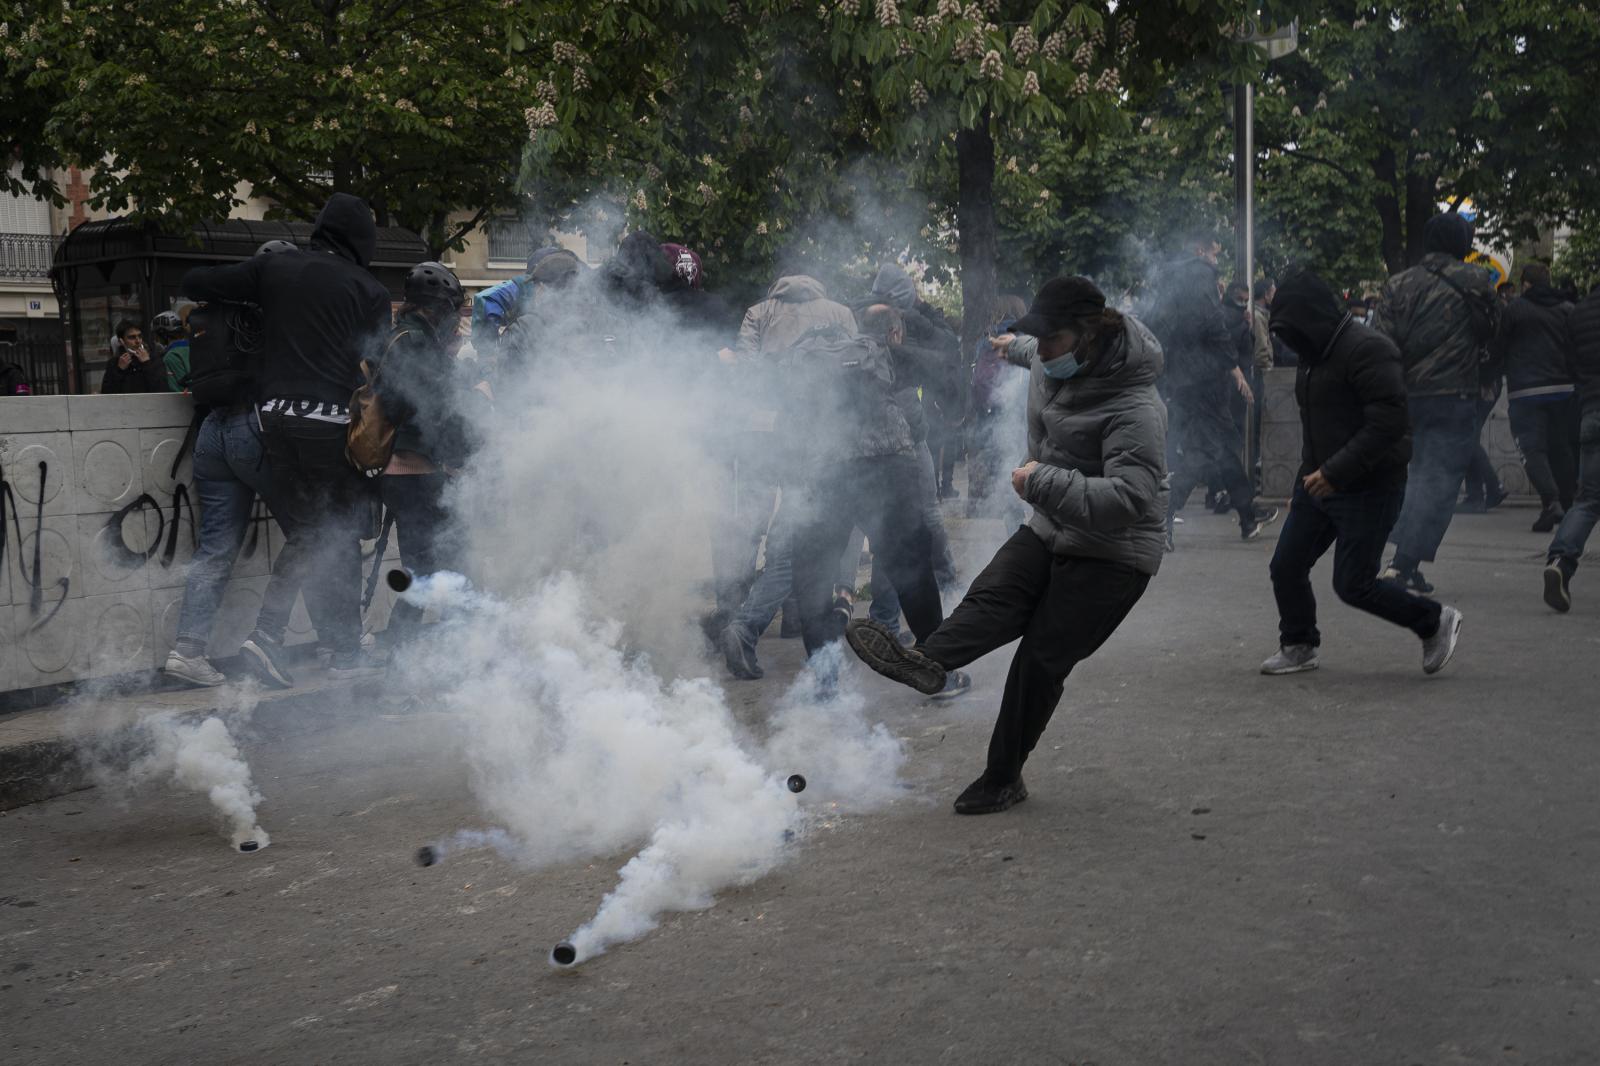 Image from DAILY NEWS - Protest in Paris on Saturday, May 1, 2021 (International...